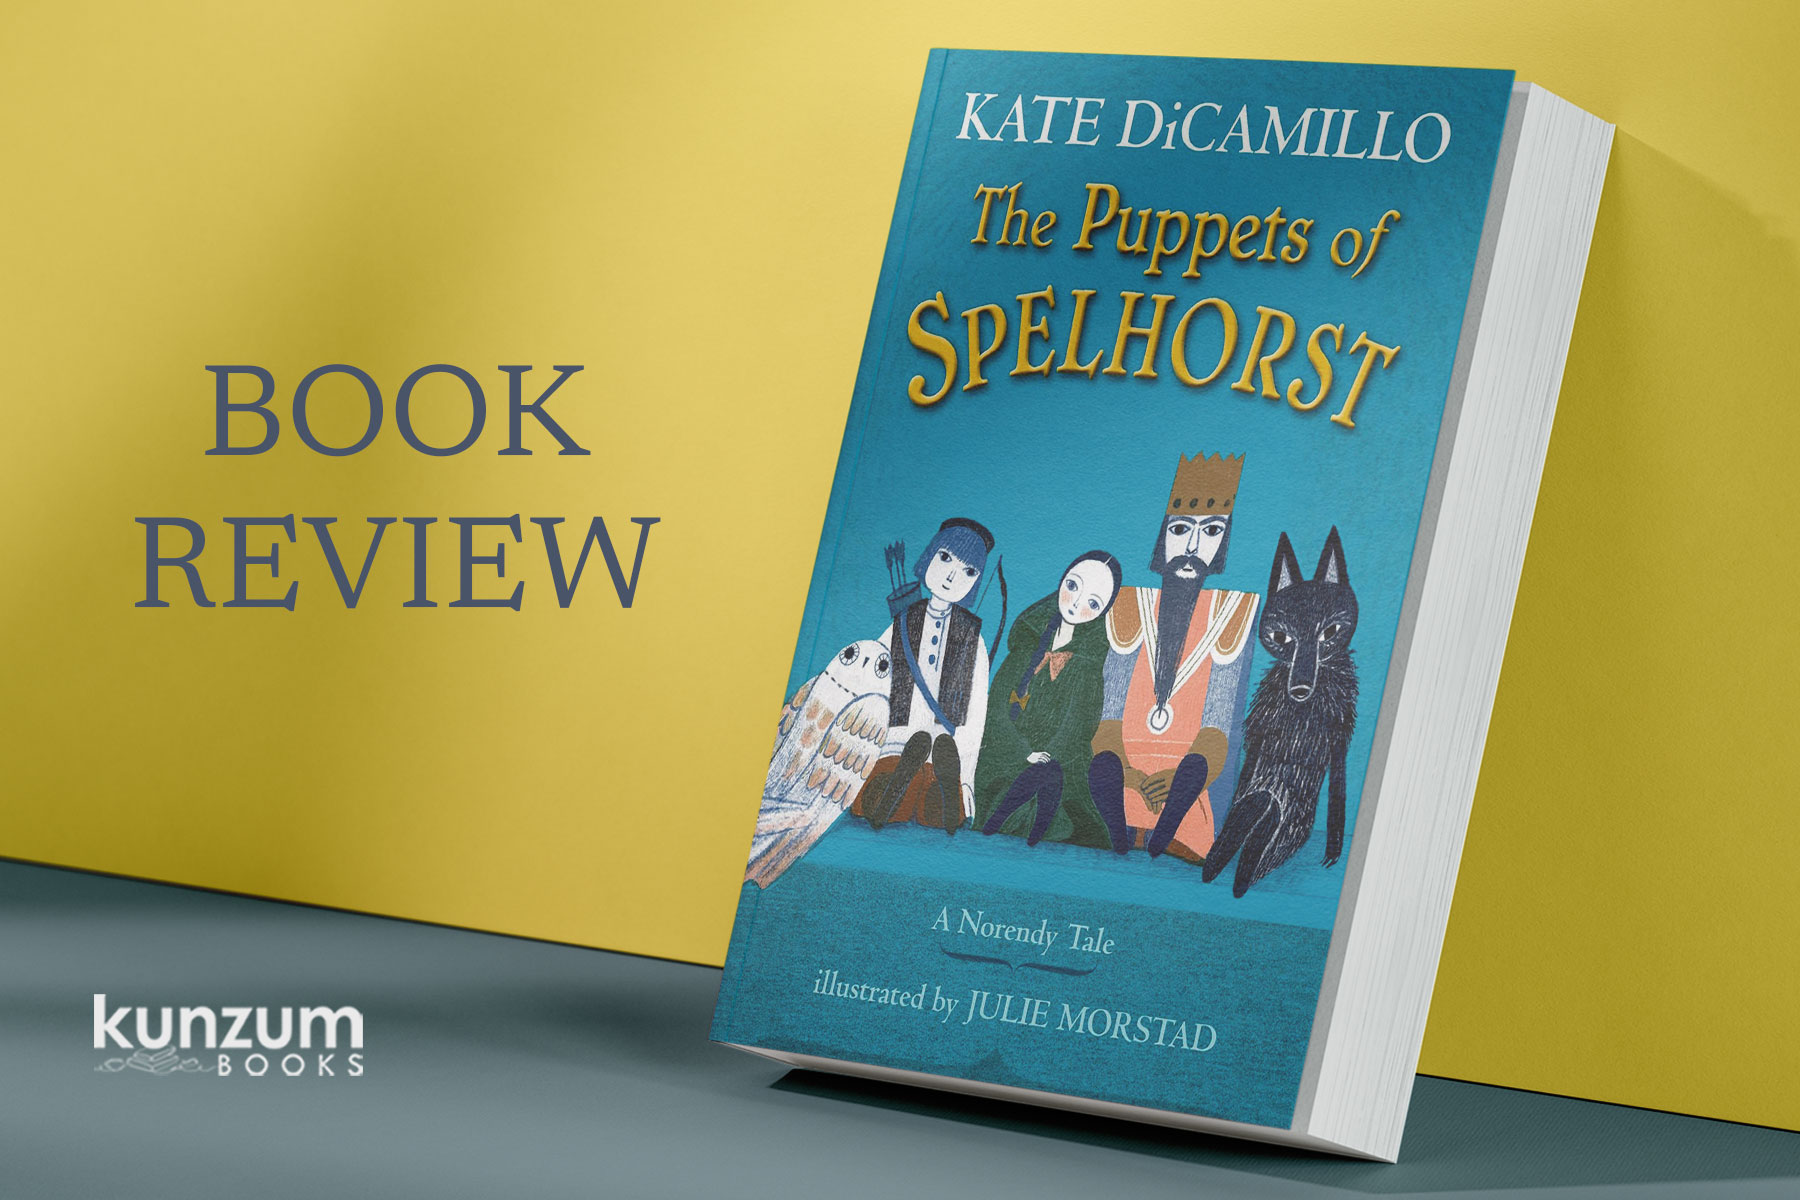 Book Review: The Puppets of Spelhorst by Kate DiCamillo